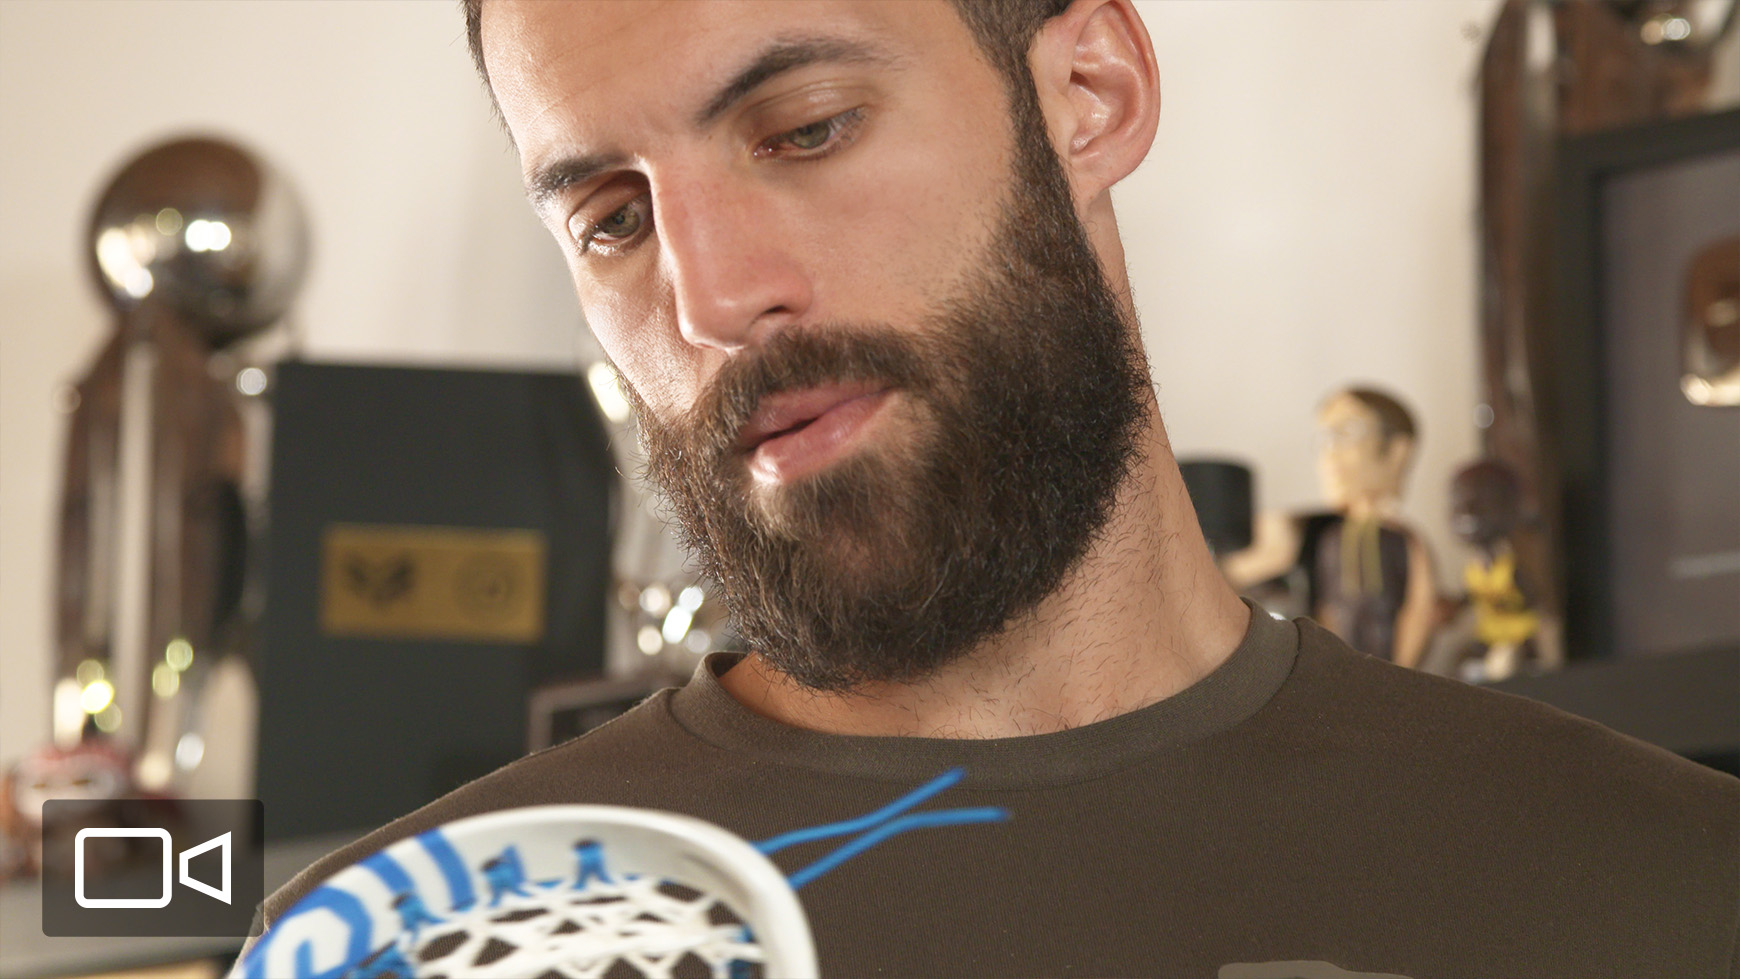 Can Paul Rabil, Lacrosse Player, Become a Celebrity? - The New